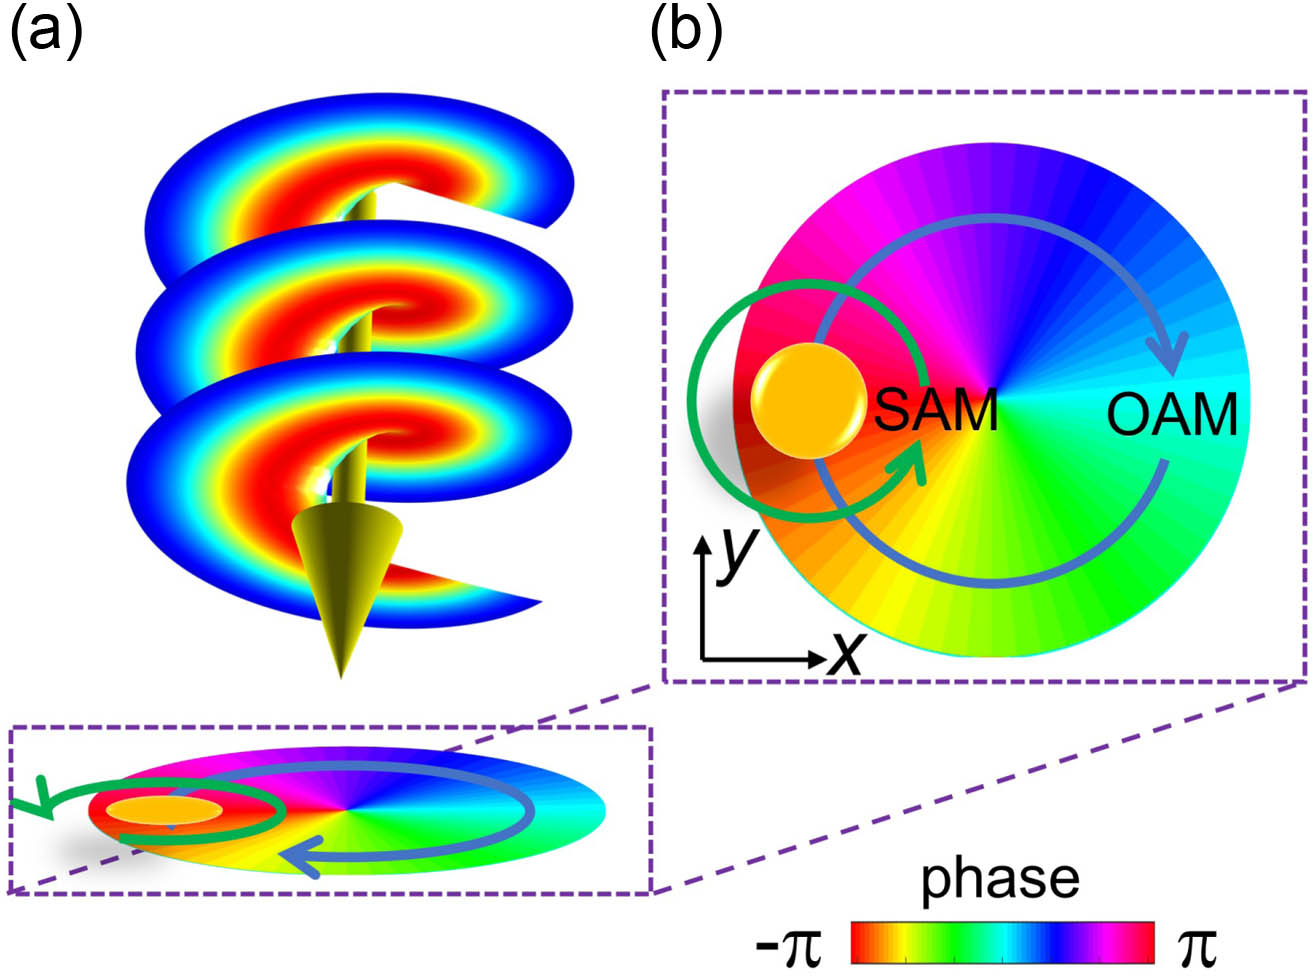 Interplay between optical OAM and SAM. (a) Schematic illustration of a nanoparticle polarized by an OAM beam with a helical wavefront. (b) Azimuthal phase gradient in the plane transverse to the propagation direction of a vortex beam in a spin-orbital state of |–1,1⟩. The yellow circle schematically refers to the nanoparticle under the illumination of a vortex beam. SAM and OAM induced particle polarizations are indicated by the green arrow and blue arrow, respectively.